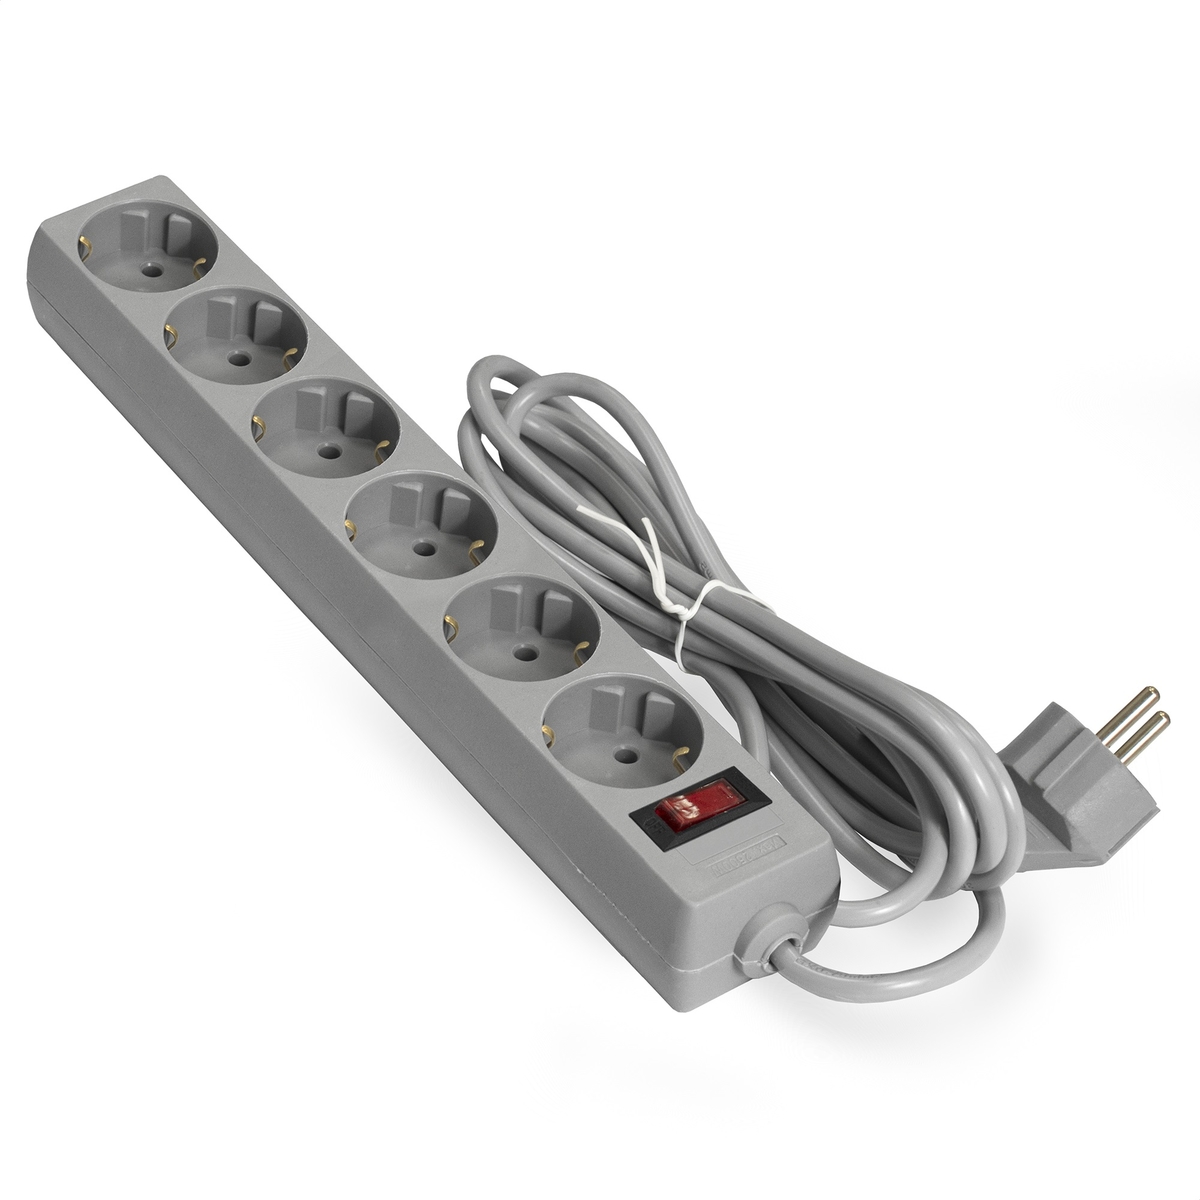 Surge protector ExeGate SP-6-3G